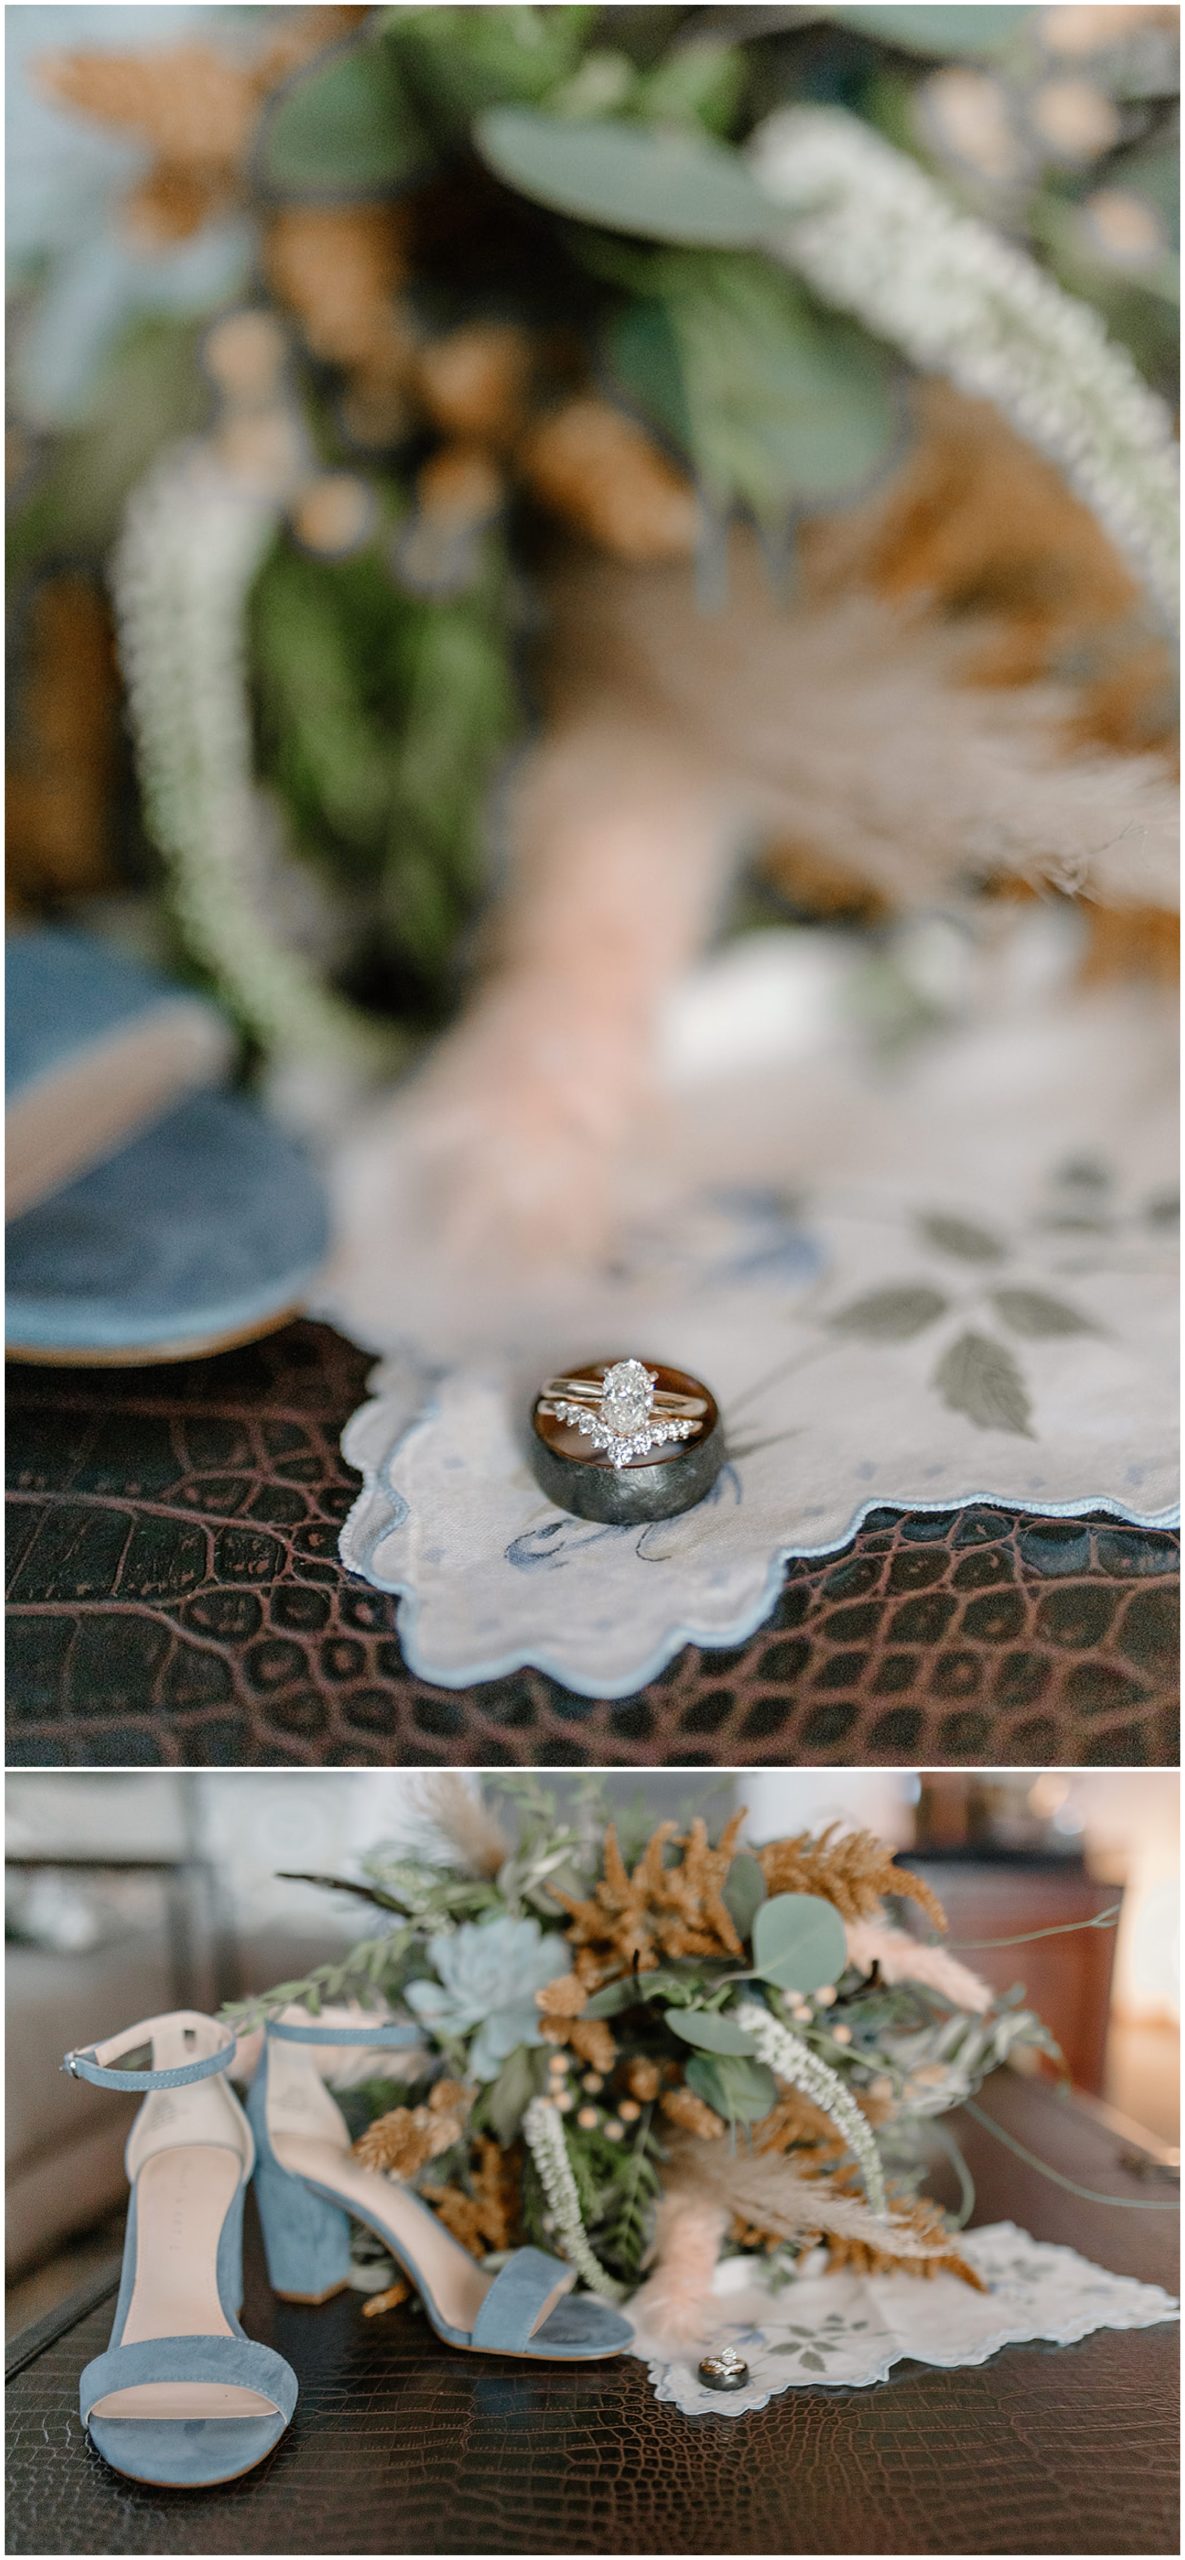 wedding ring and details